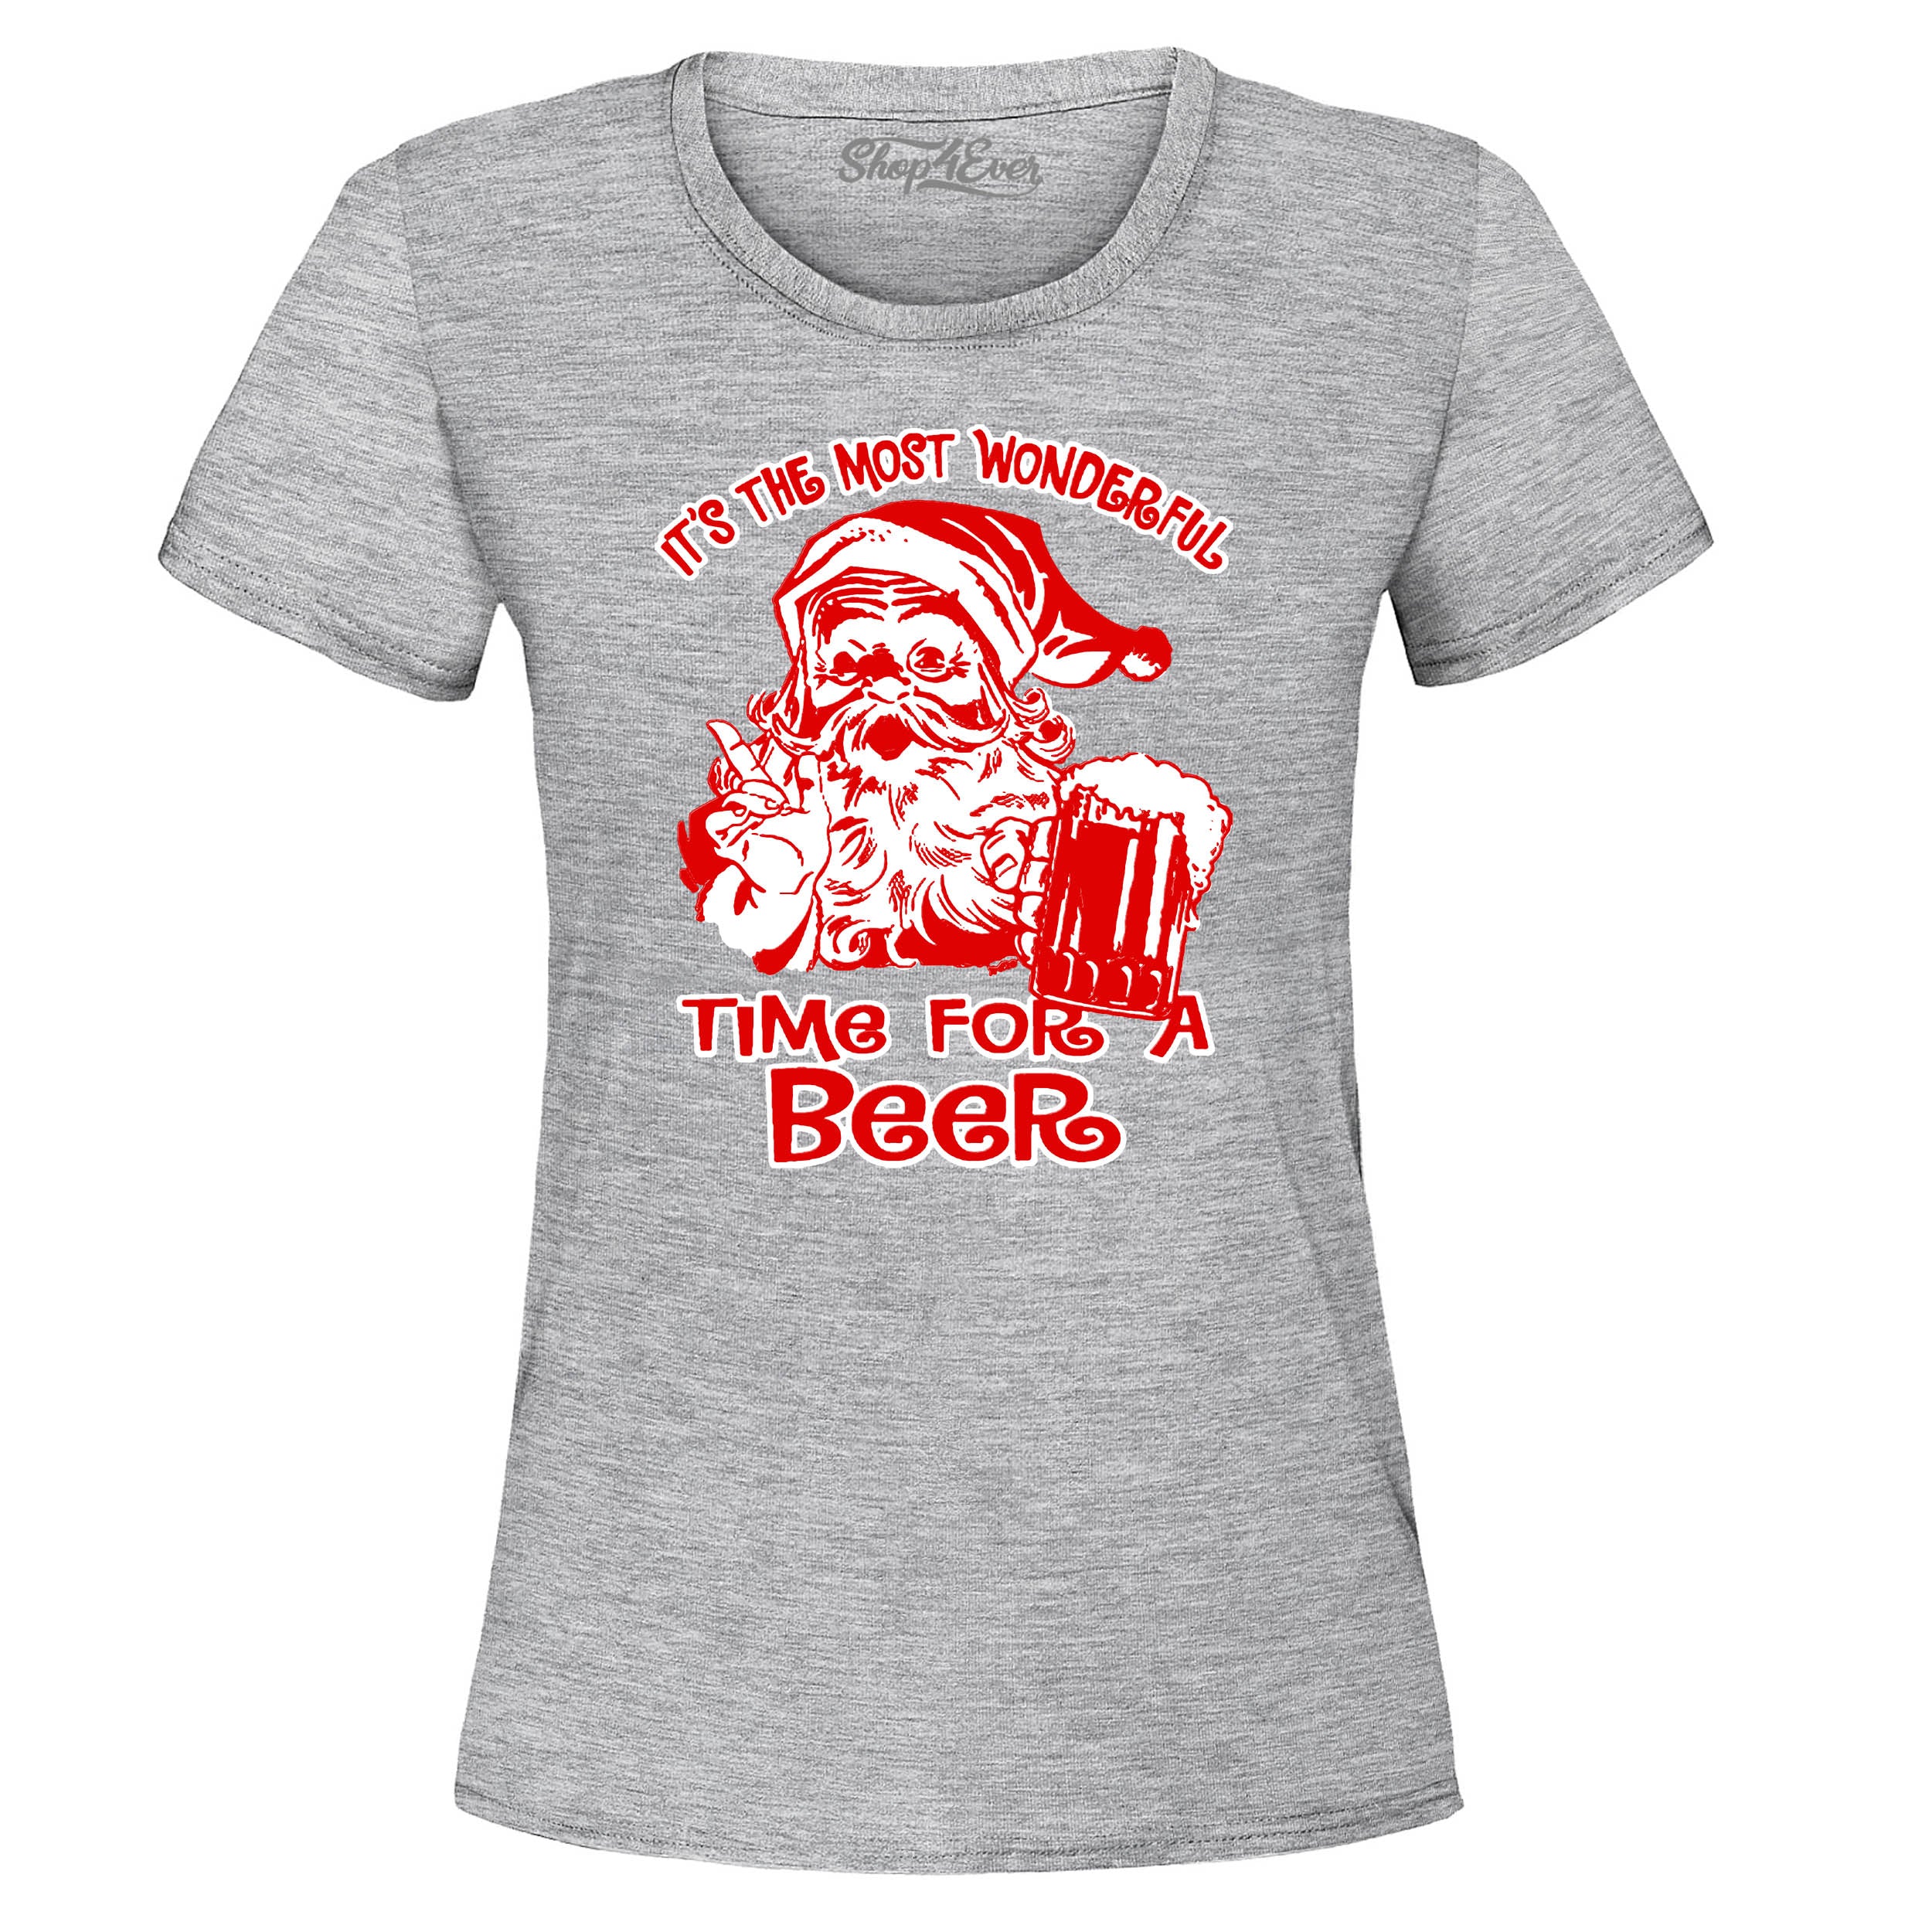 It's The Most Wonderful Time for a Beer Women's T-Shirt